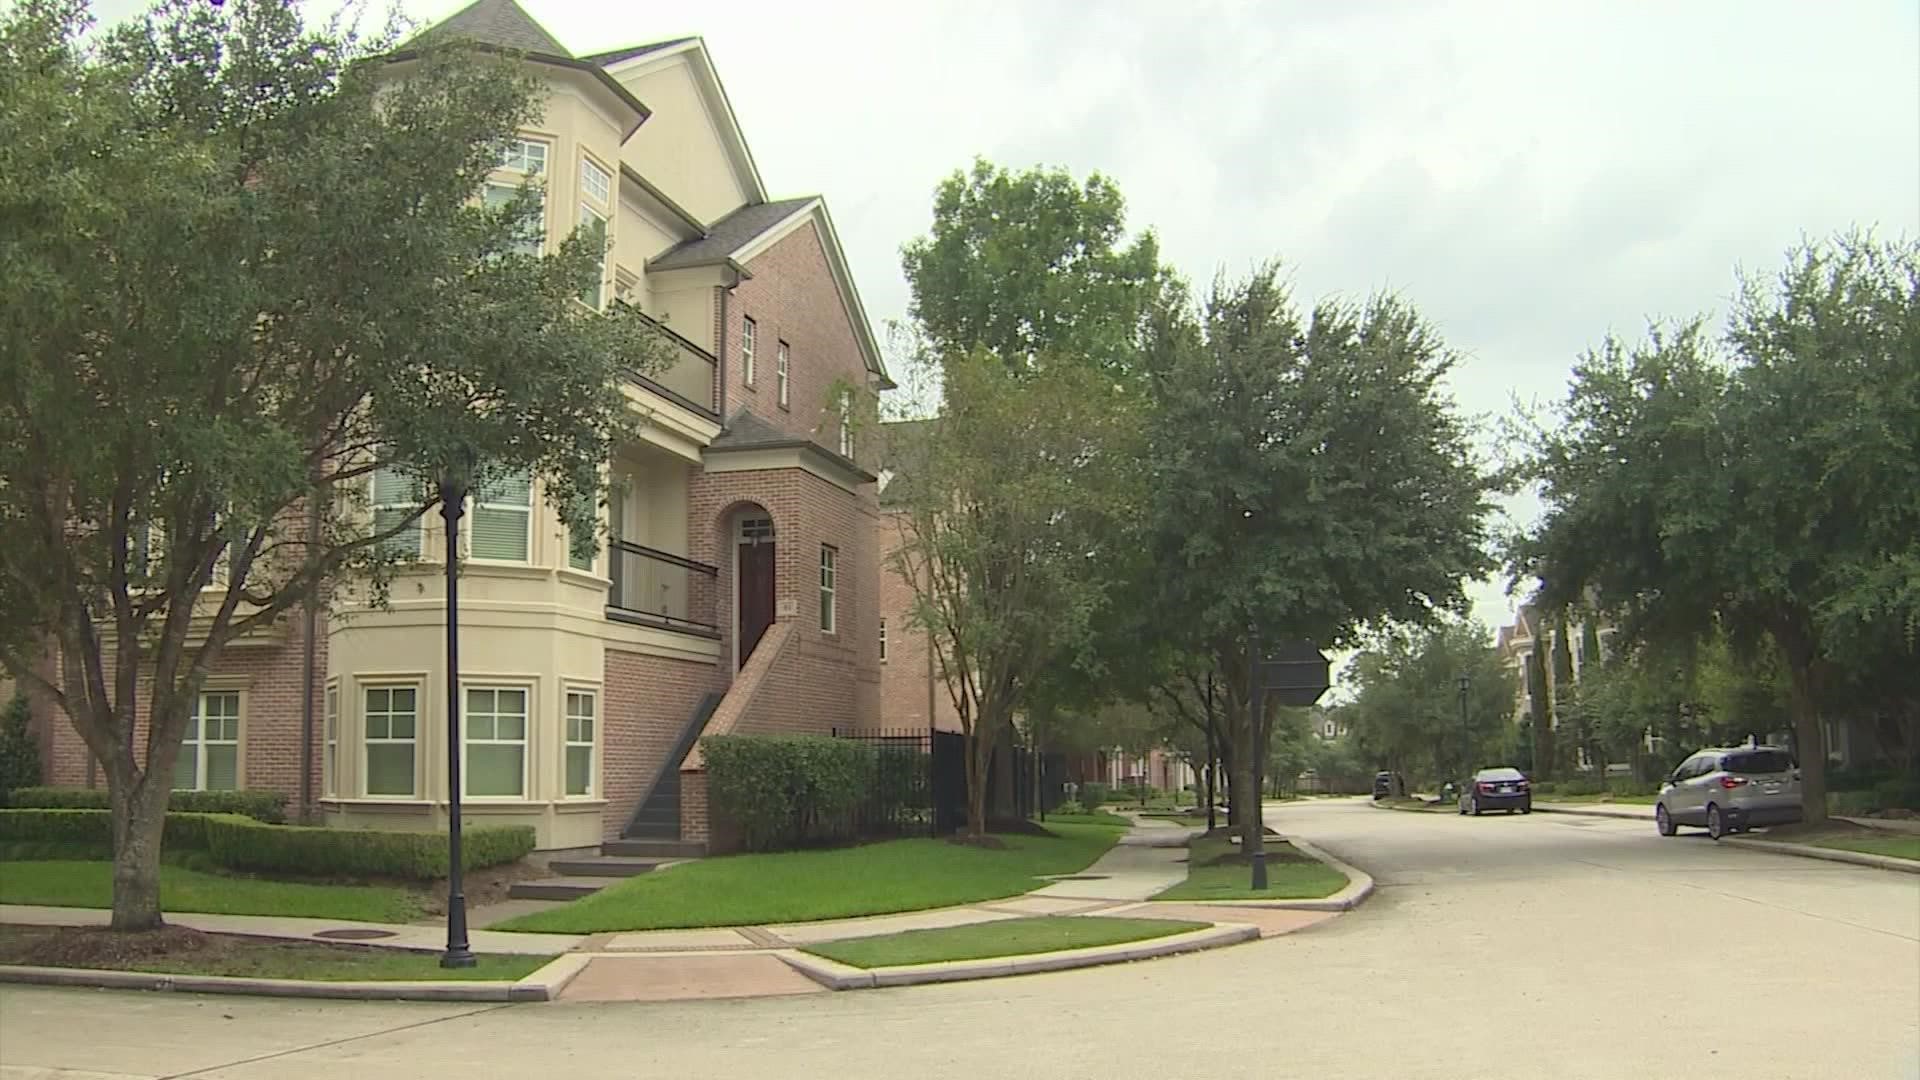 Both Greg Abbott and Beto O’Rourke have introduced plans to reduce the burden of property taxes for homeowners.